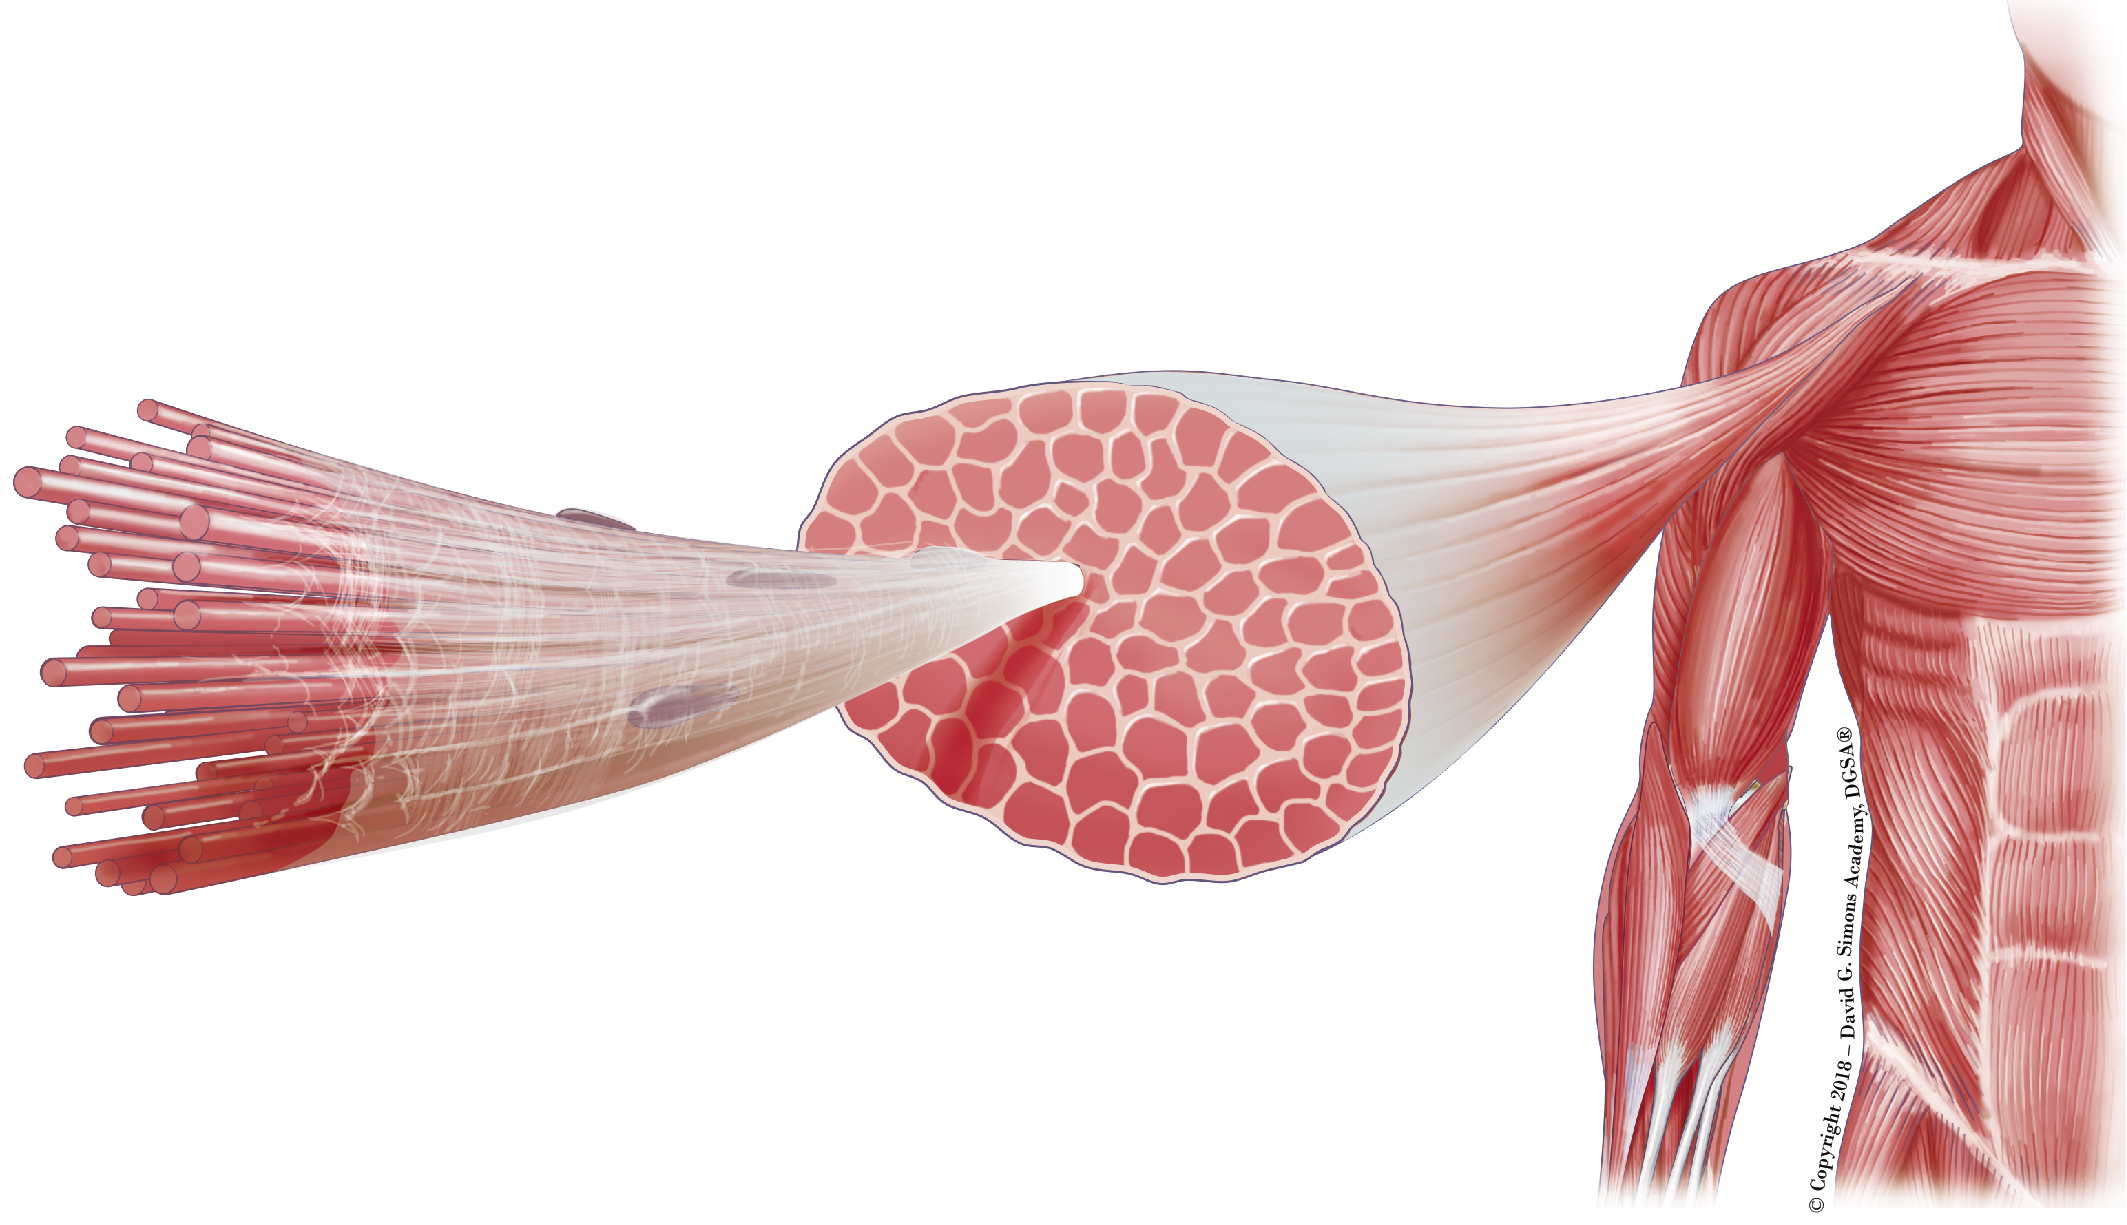 Muscle connective tissue